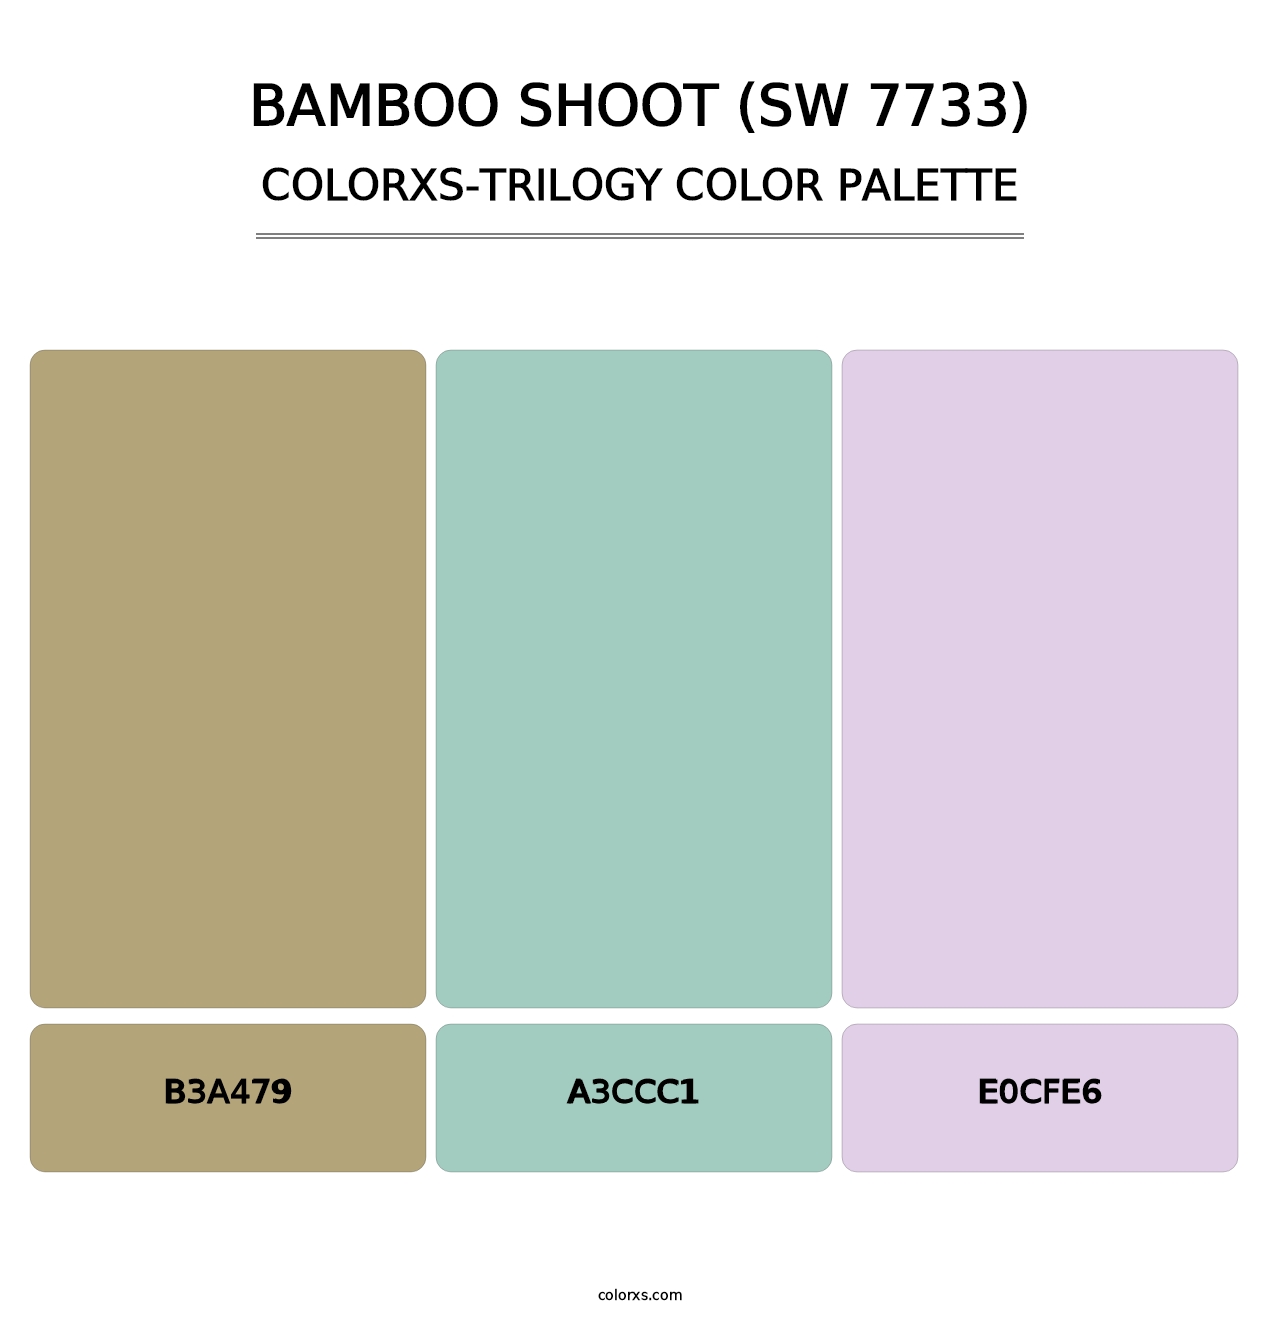 Bamboo Shoot (SW 7733) - Colorxs Trilogy Palette